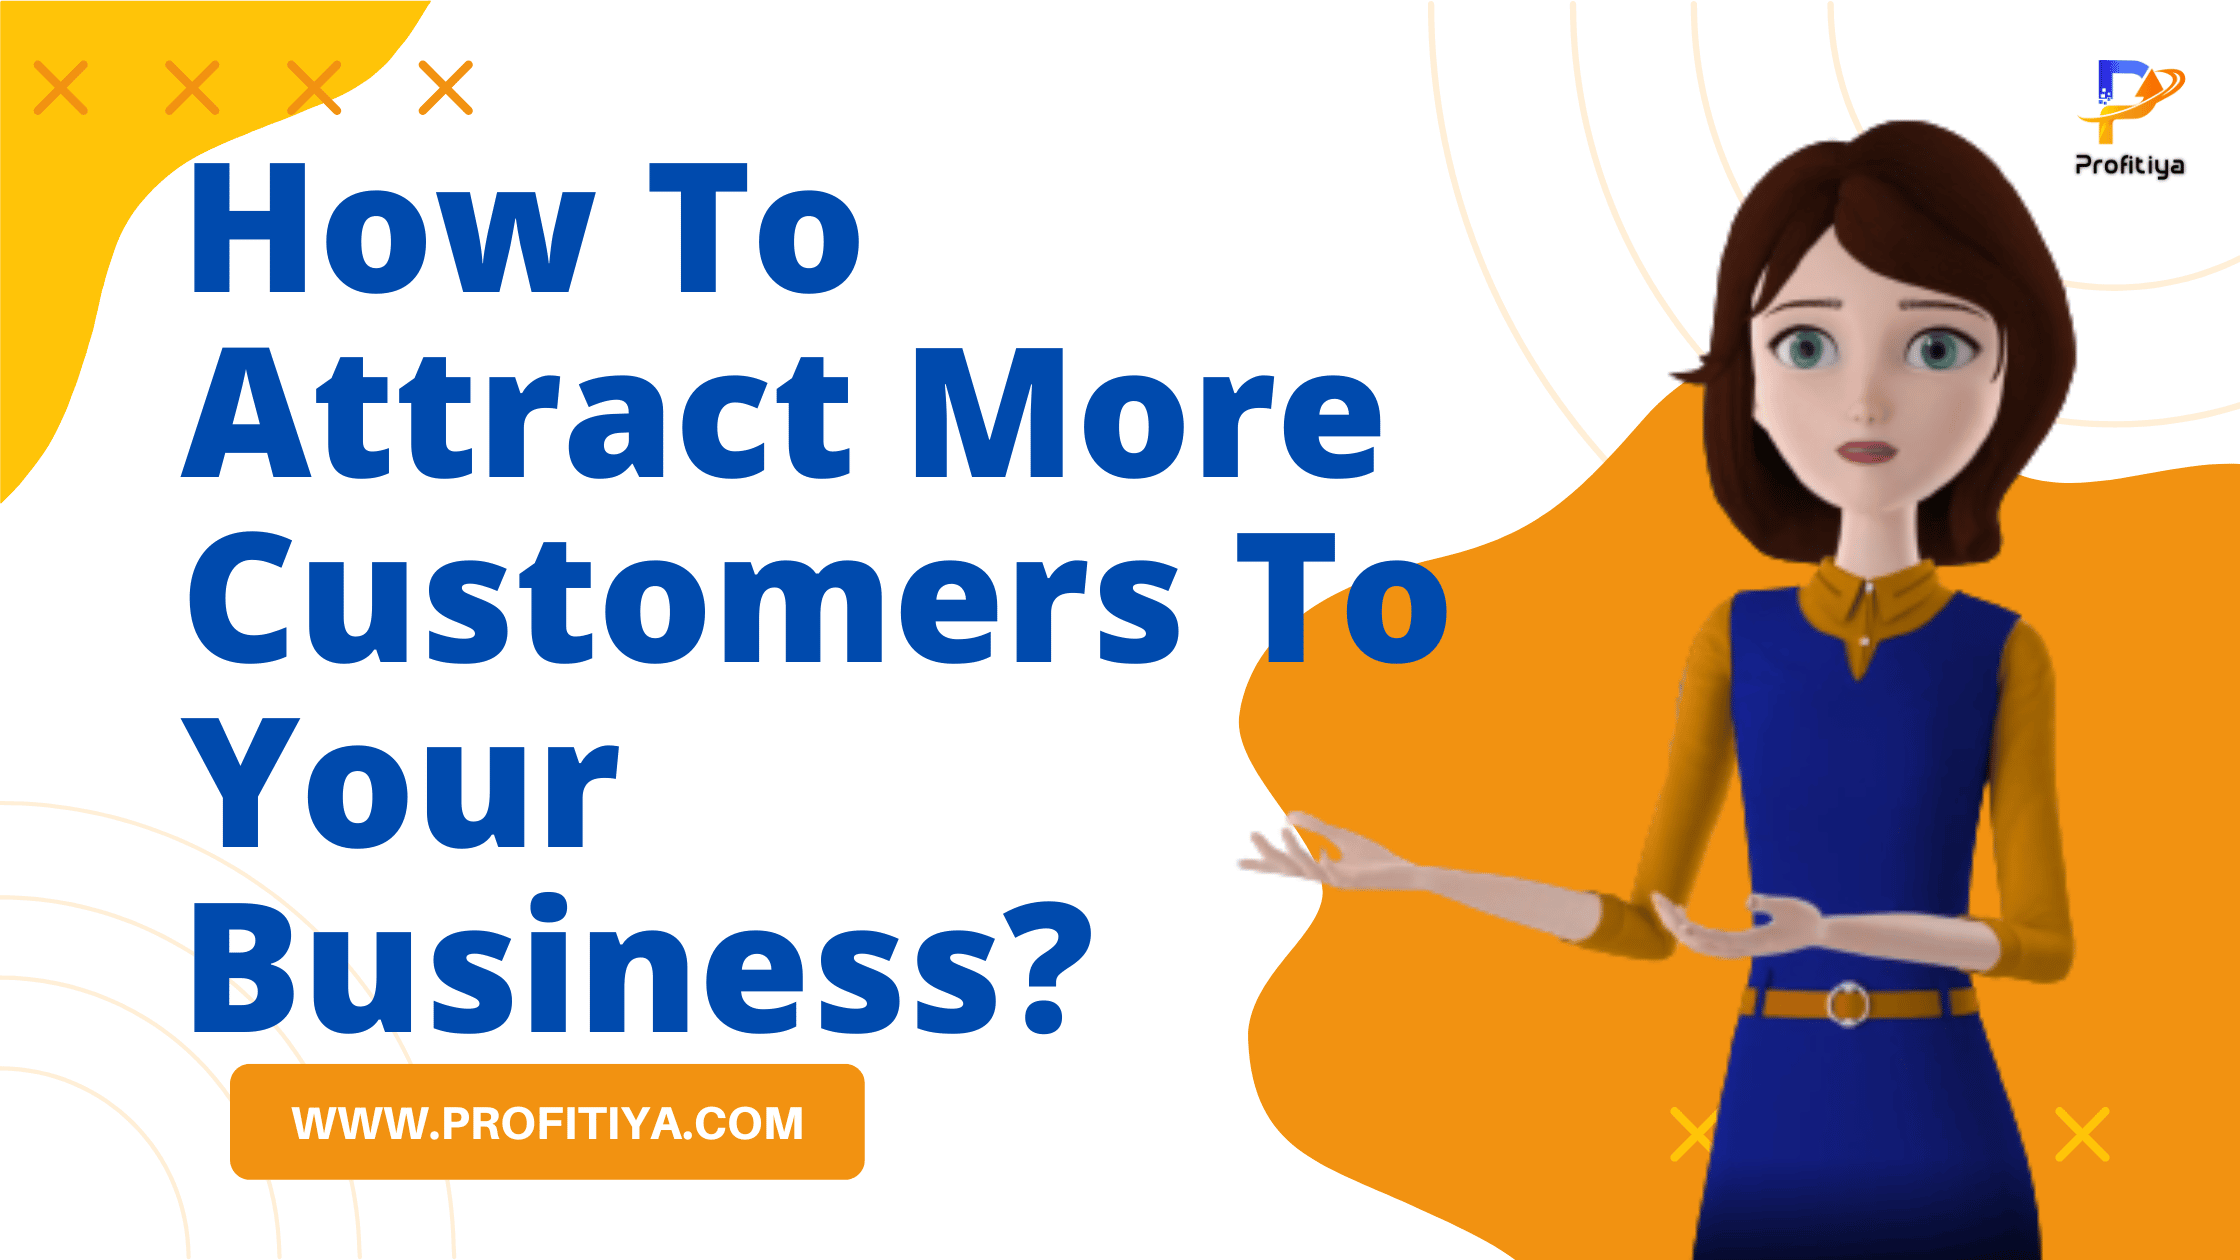 How To Attract More Customers To Your Business